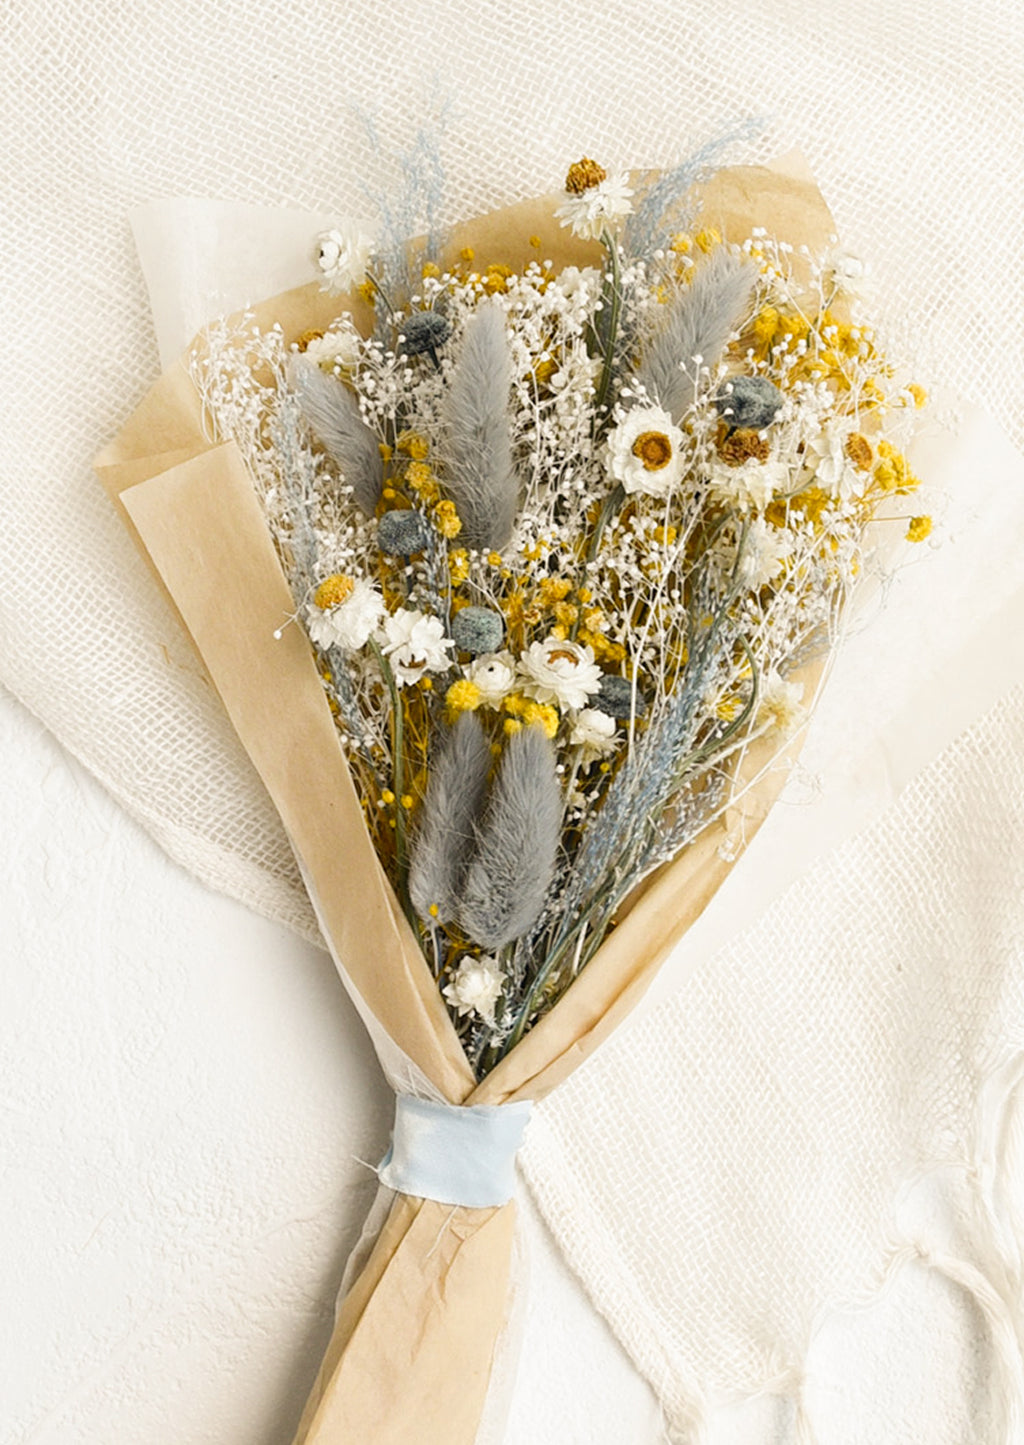 Full Size: A large bouquet of dried yellow, white and light blue flowers wrapped in parchment paper